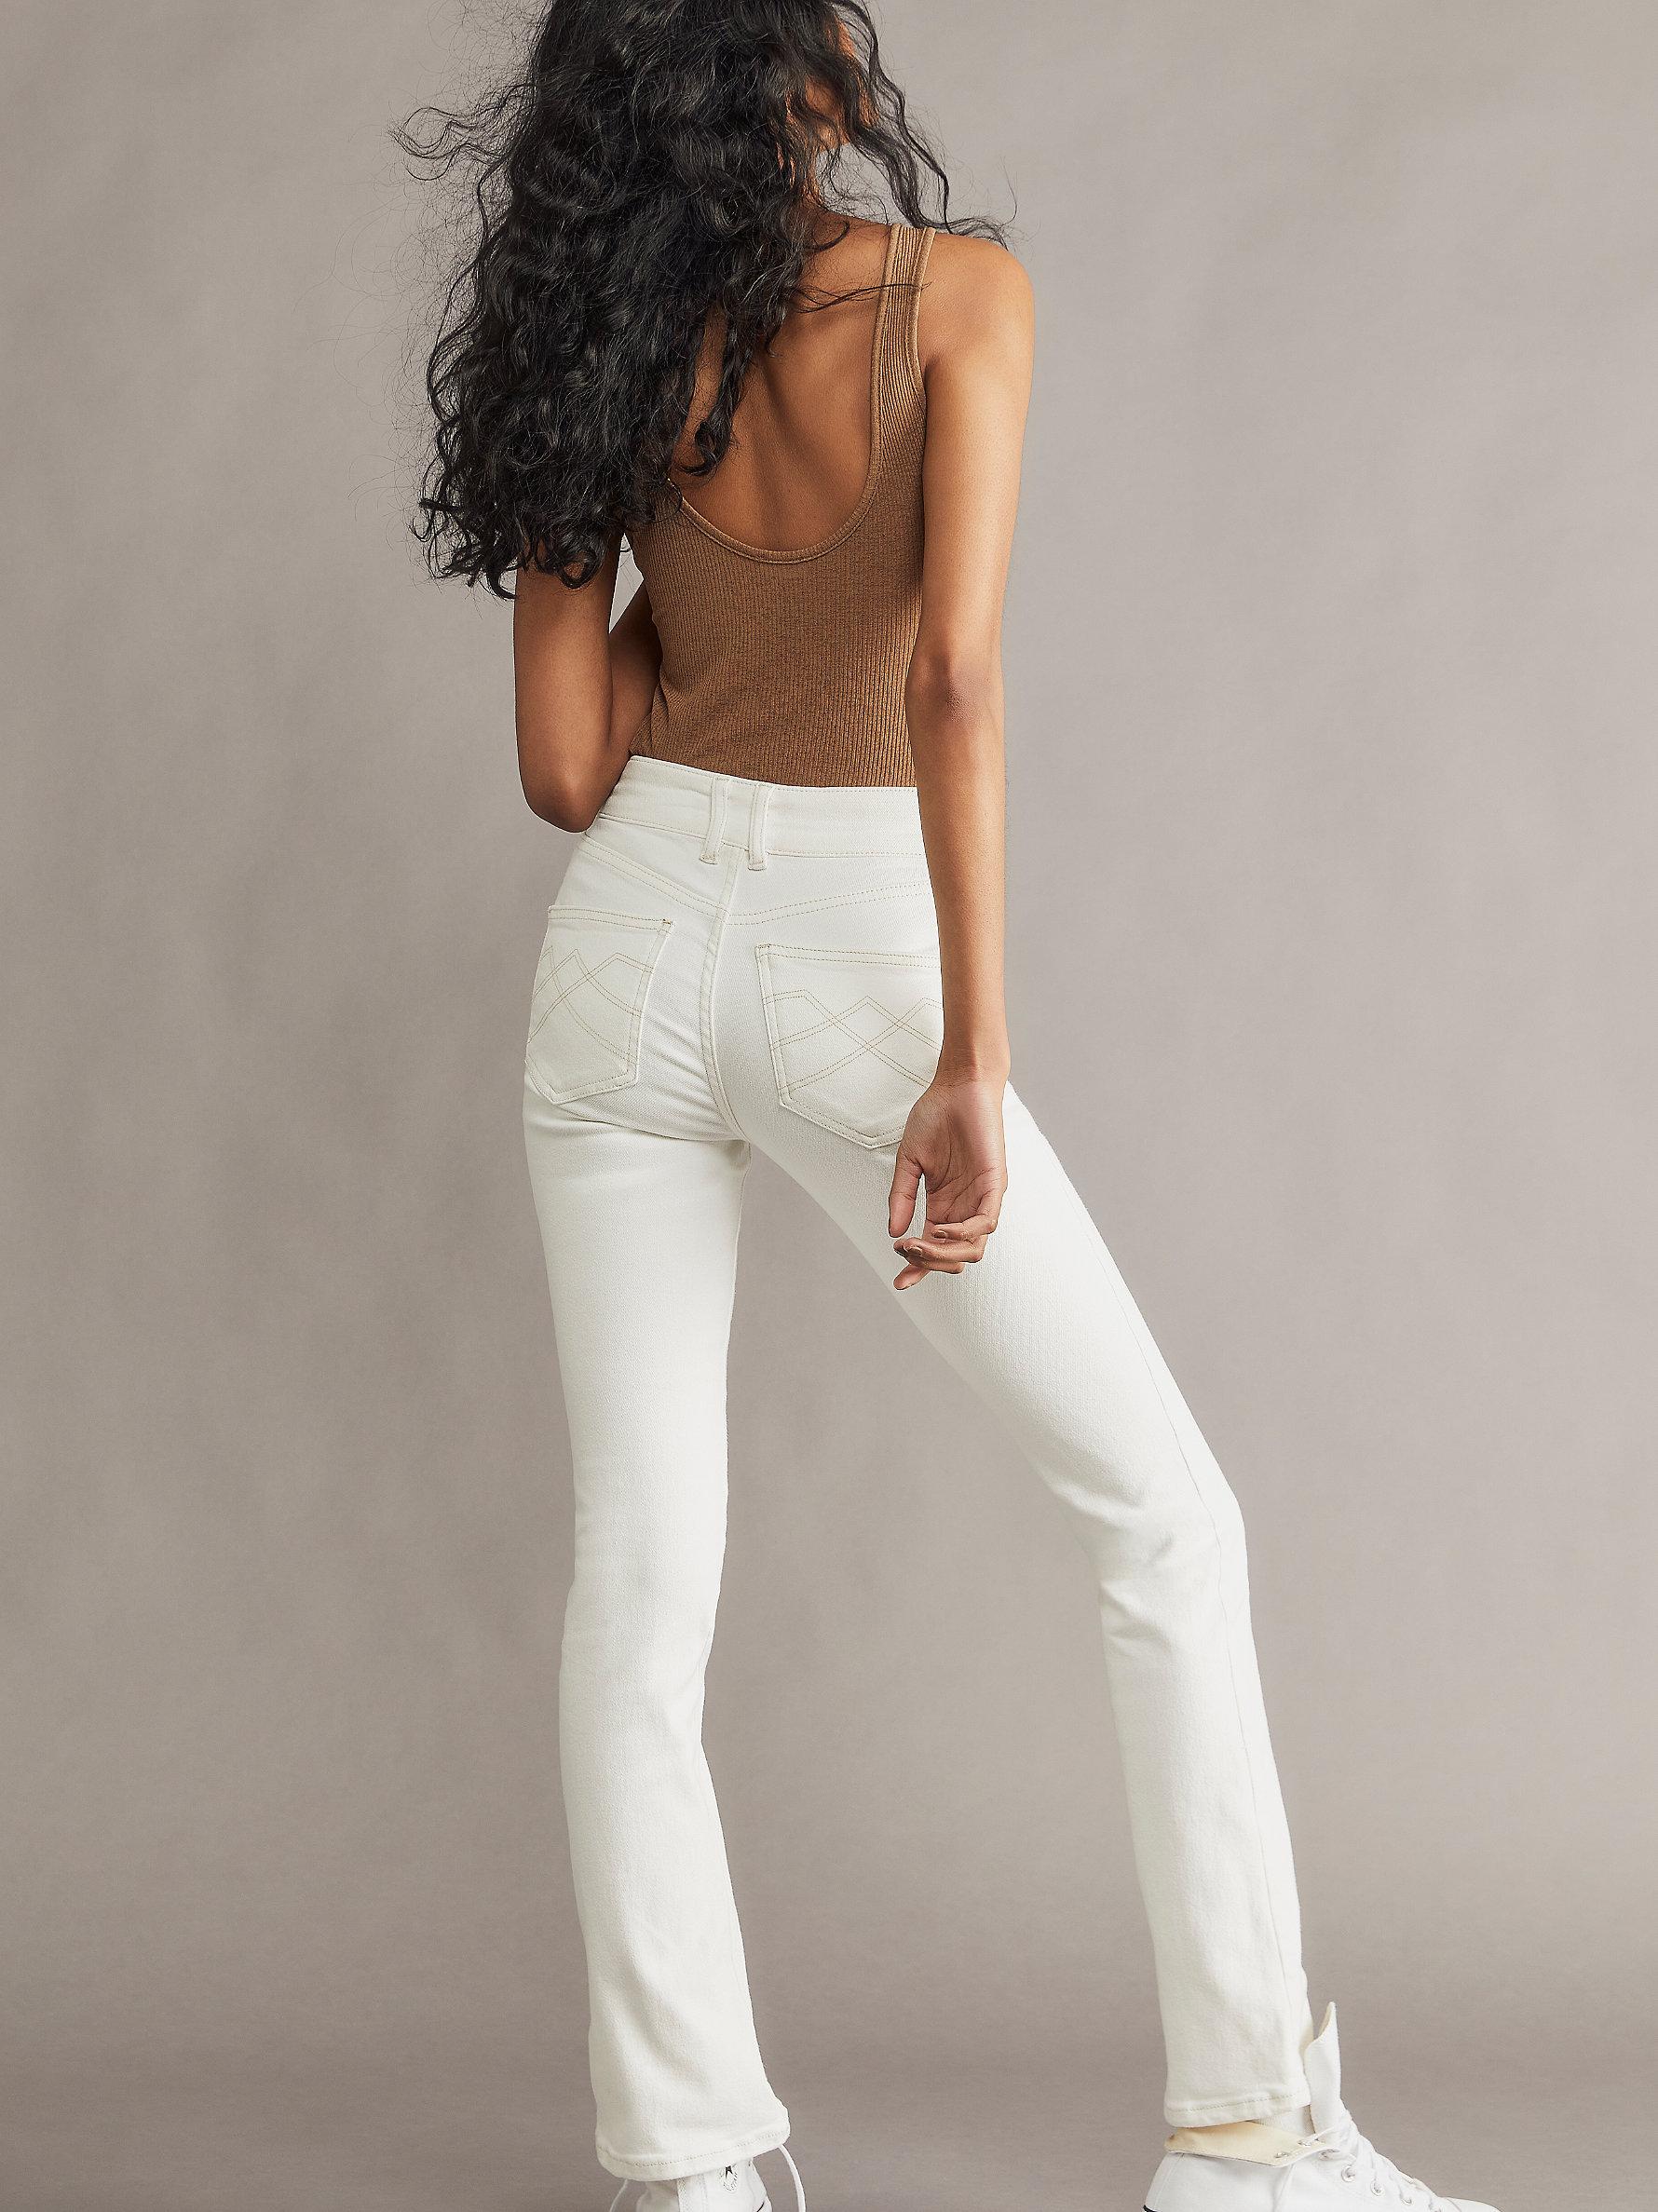 Free People Shayla Skinny Flare Jeans in White | Lyst